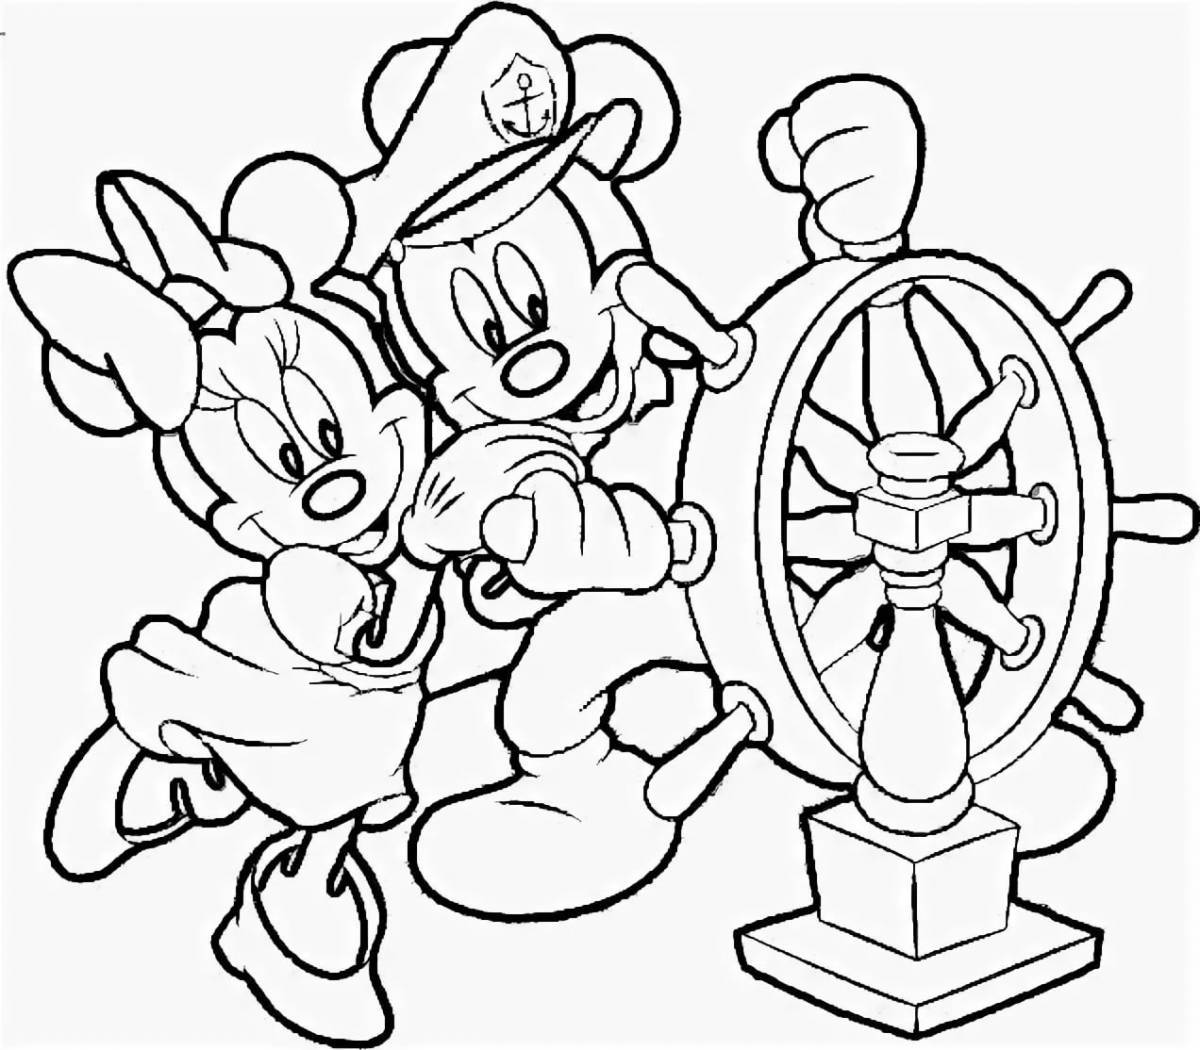 Radiant coloring page enable